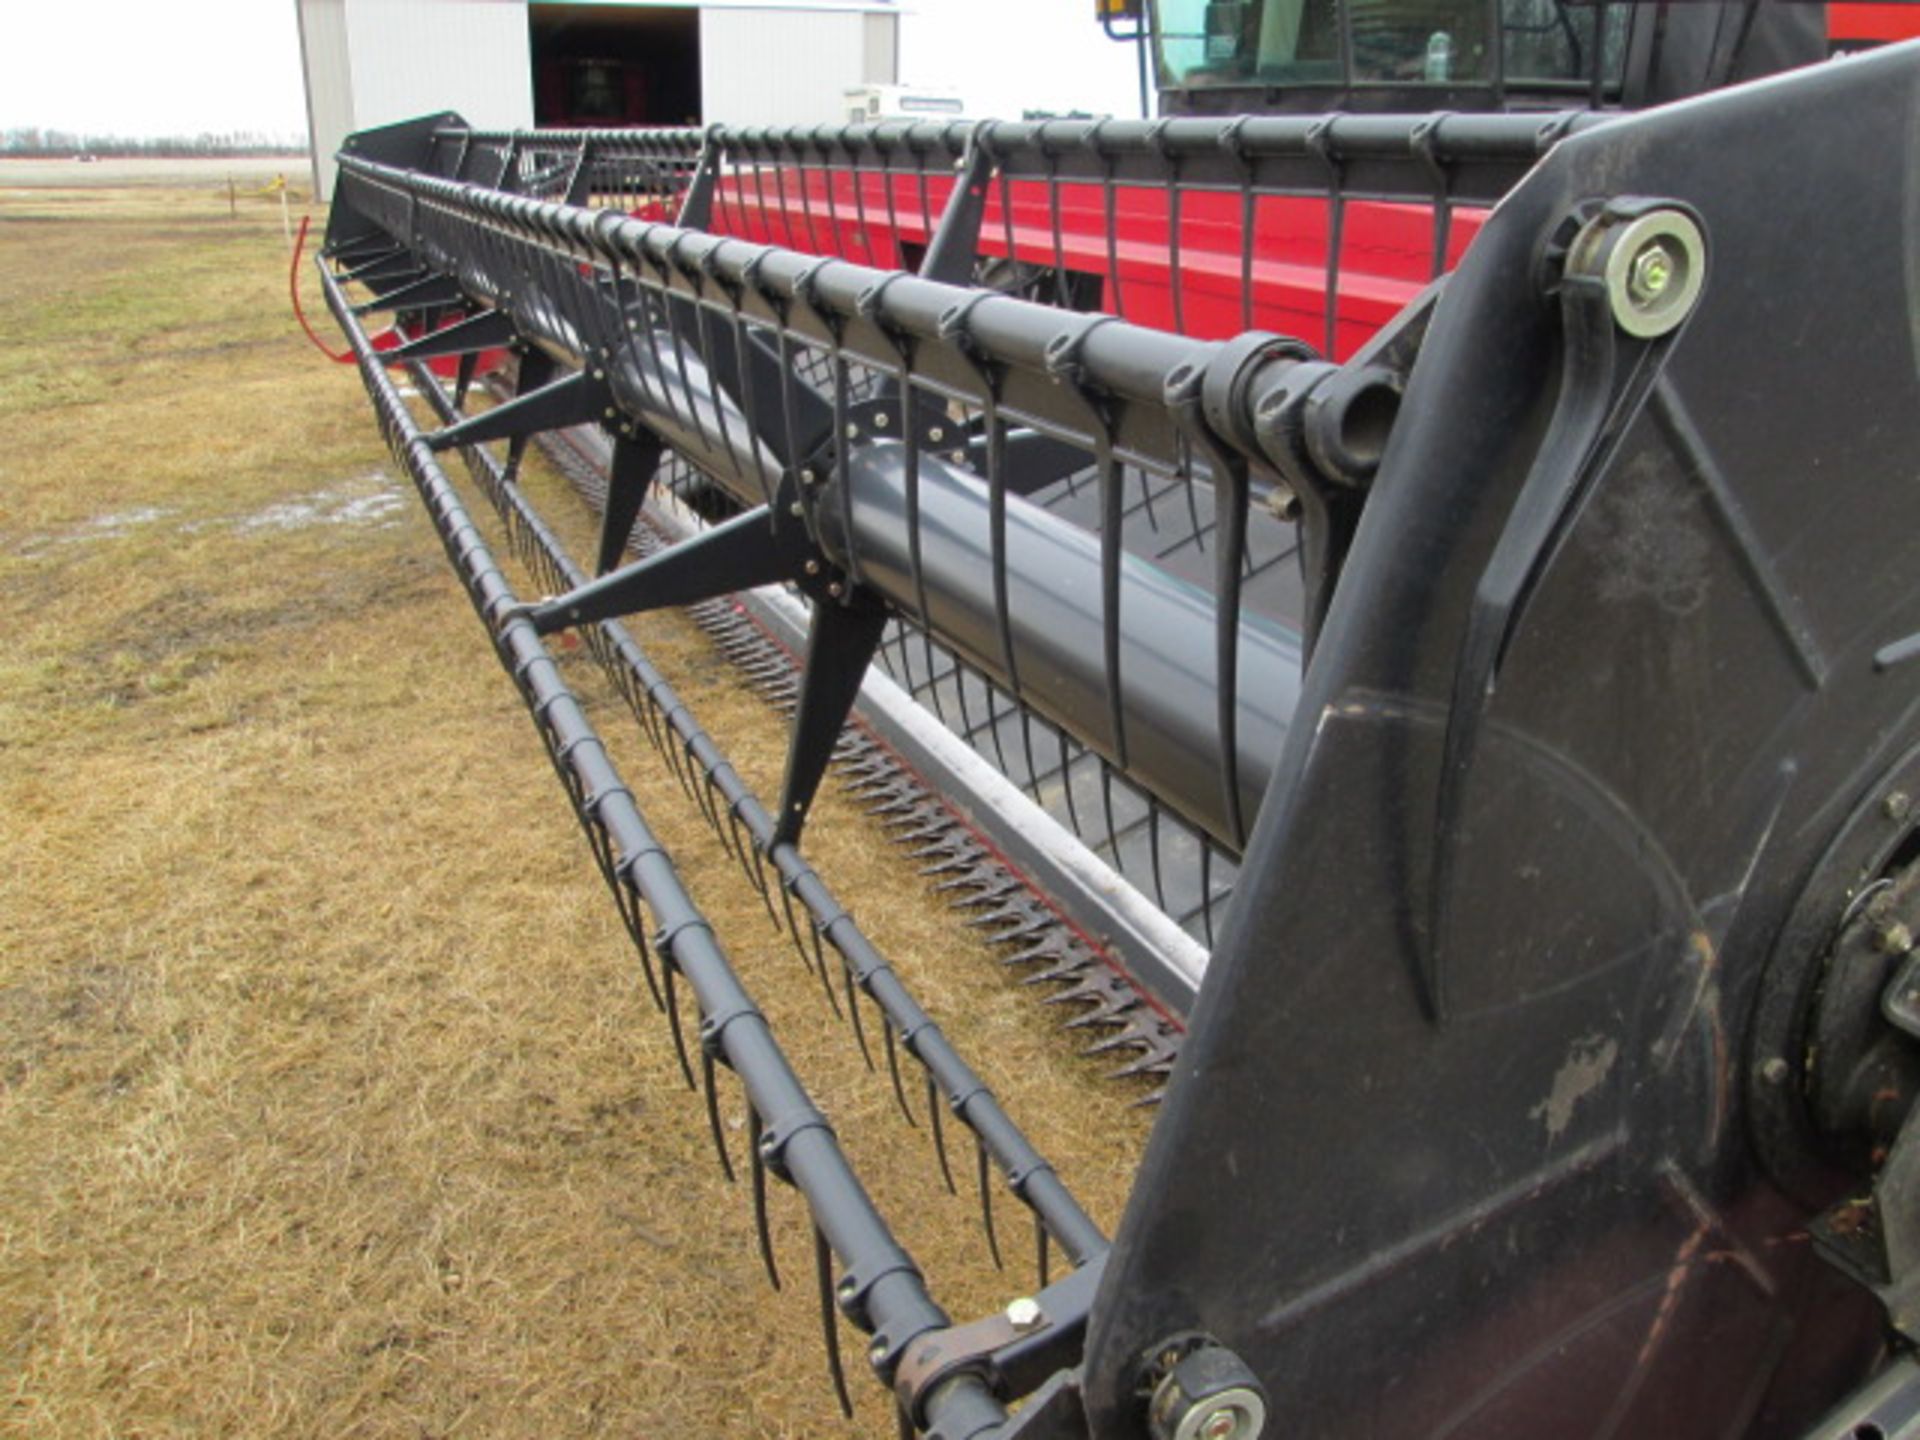 Case WDX 1202 S swather (2005), c/w 30' DHX 302 header (2007), showing 795 eng hr, dbl knife - Image 29 of 32